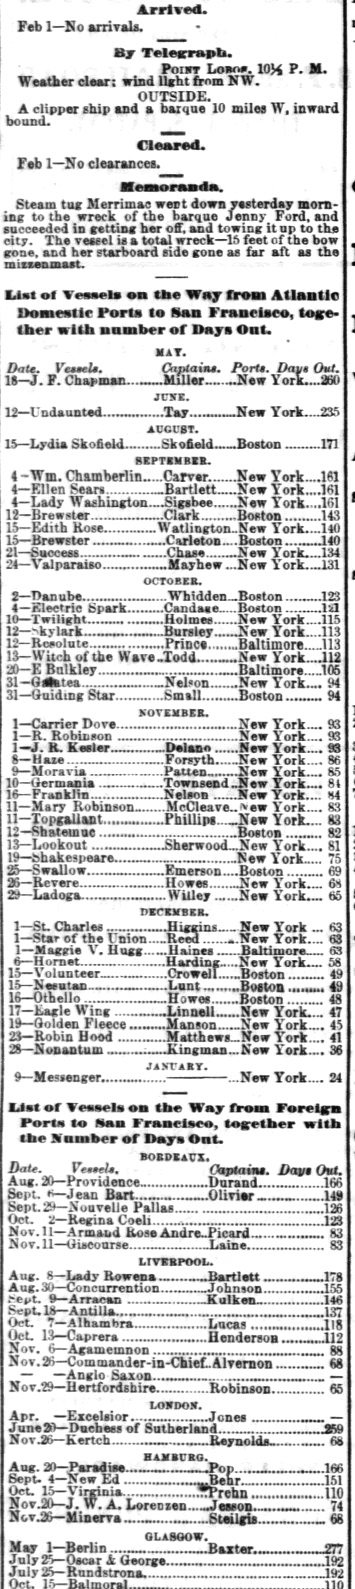 Shipping Intelligence February 2, 1864 from the Daily Alta California.